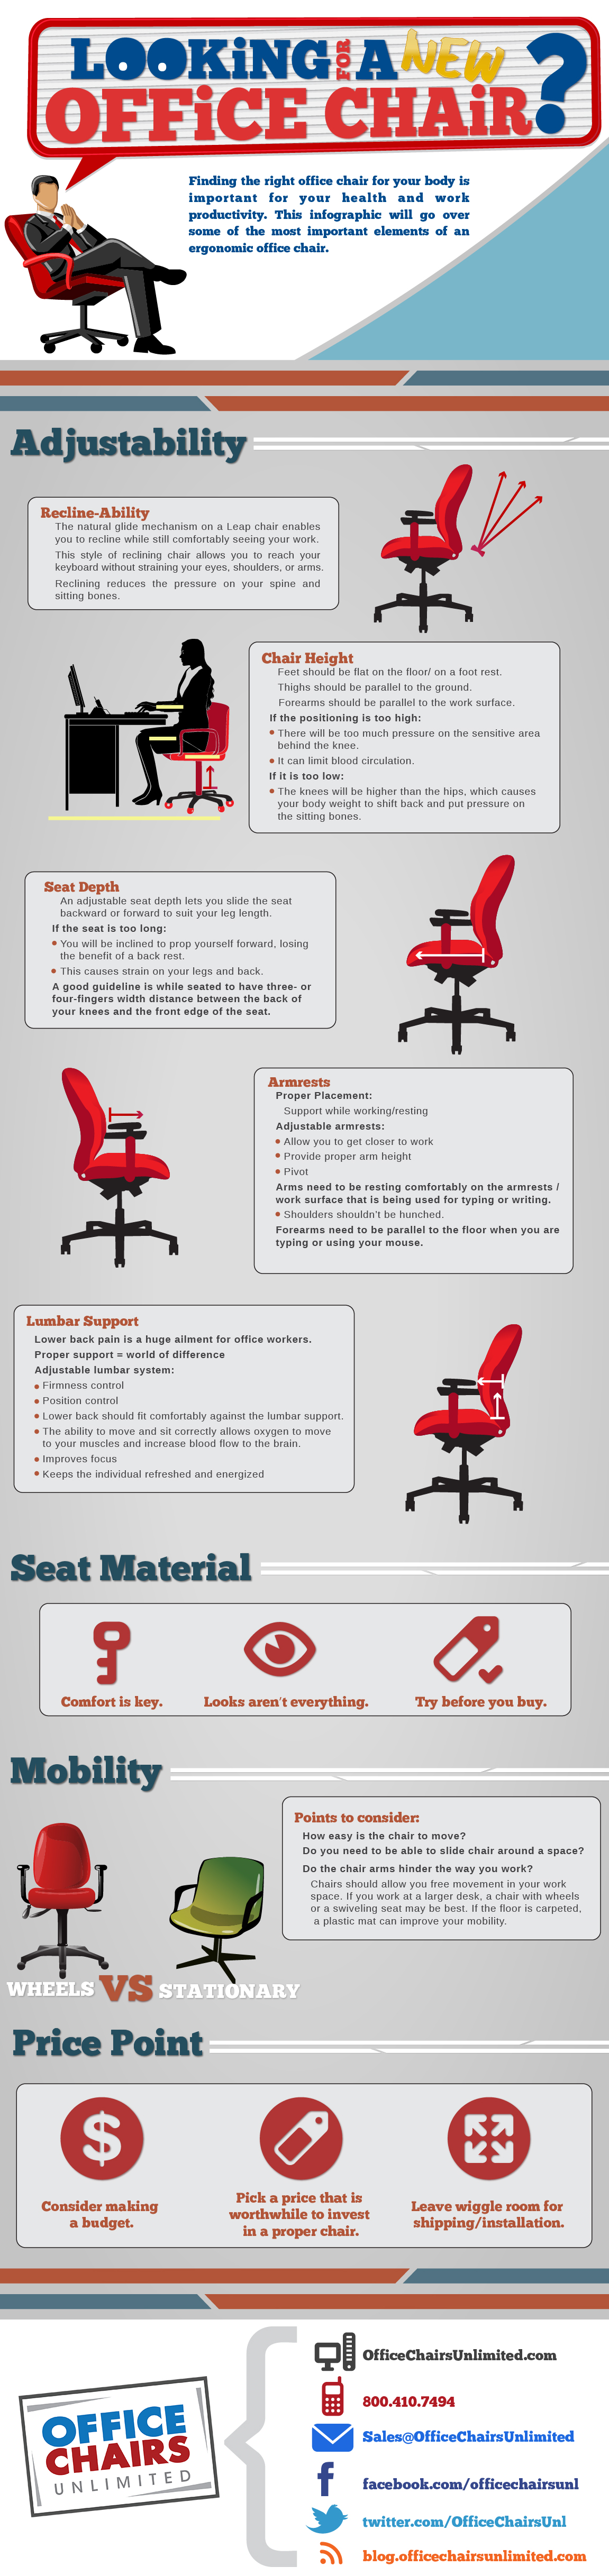 Office Chairs Unlimited Creates Ergonomics Infographic For Tips On Healthy Sitting